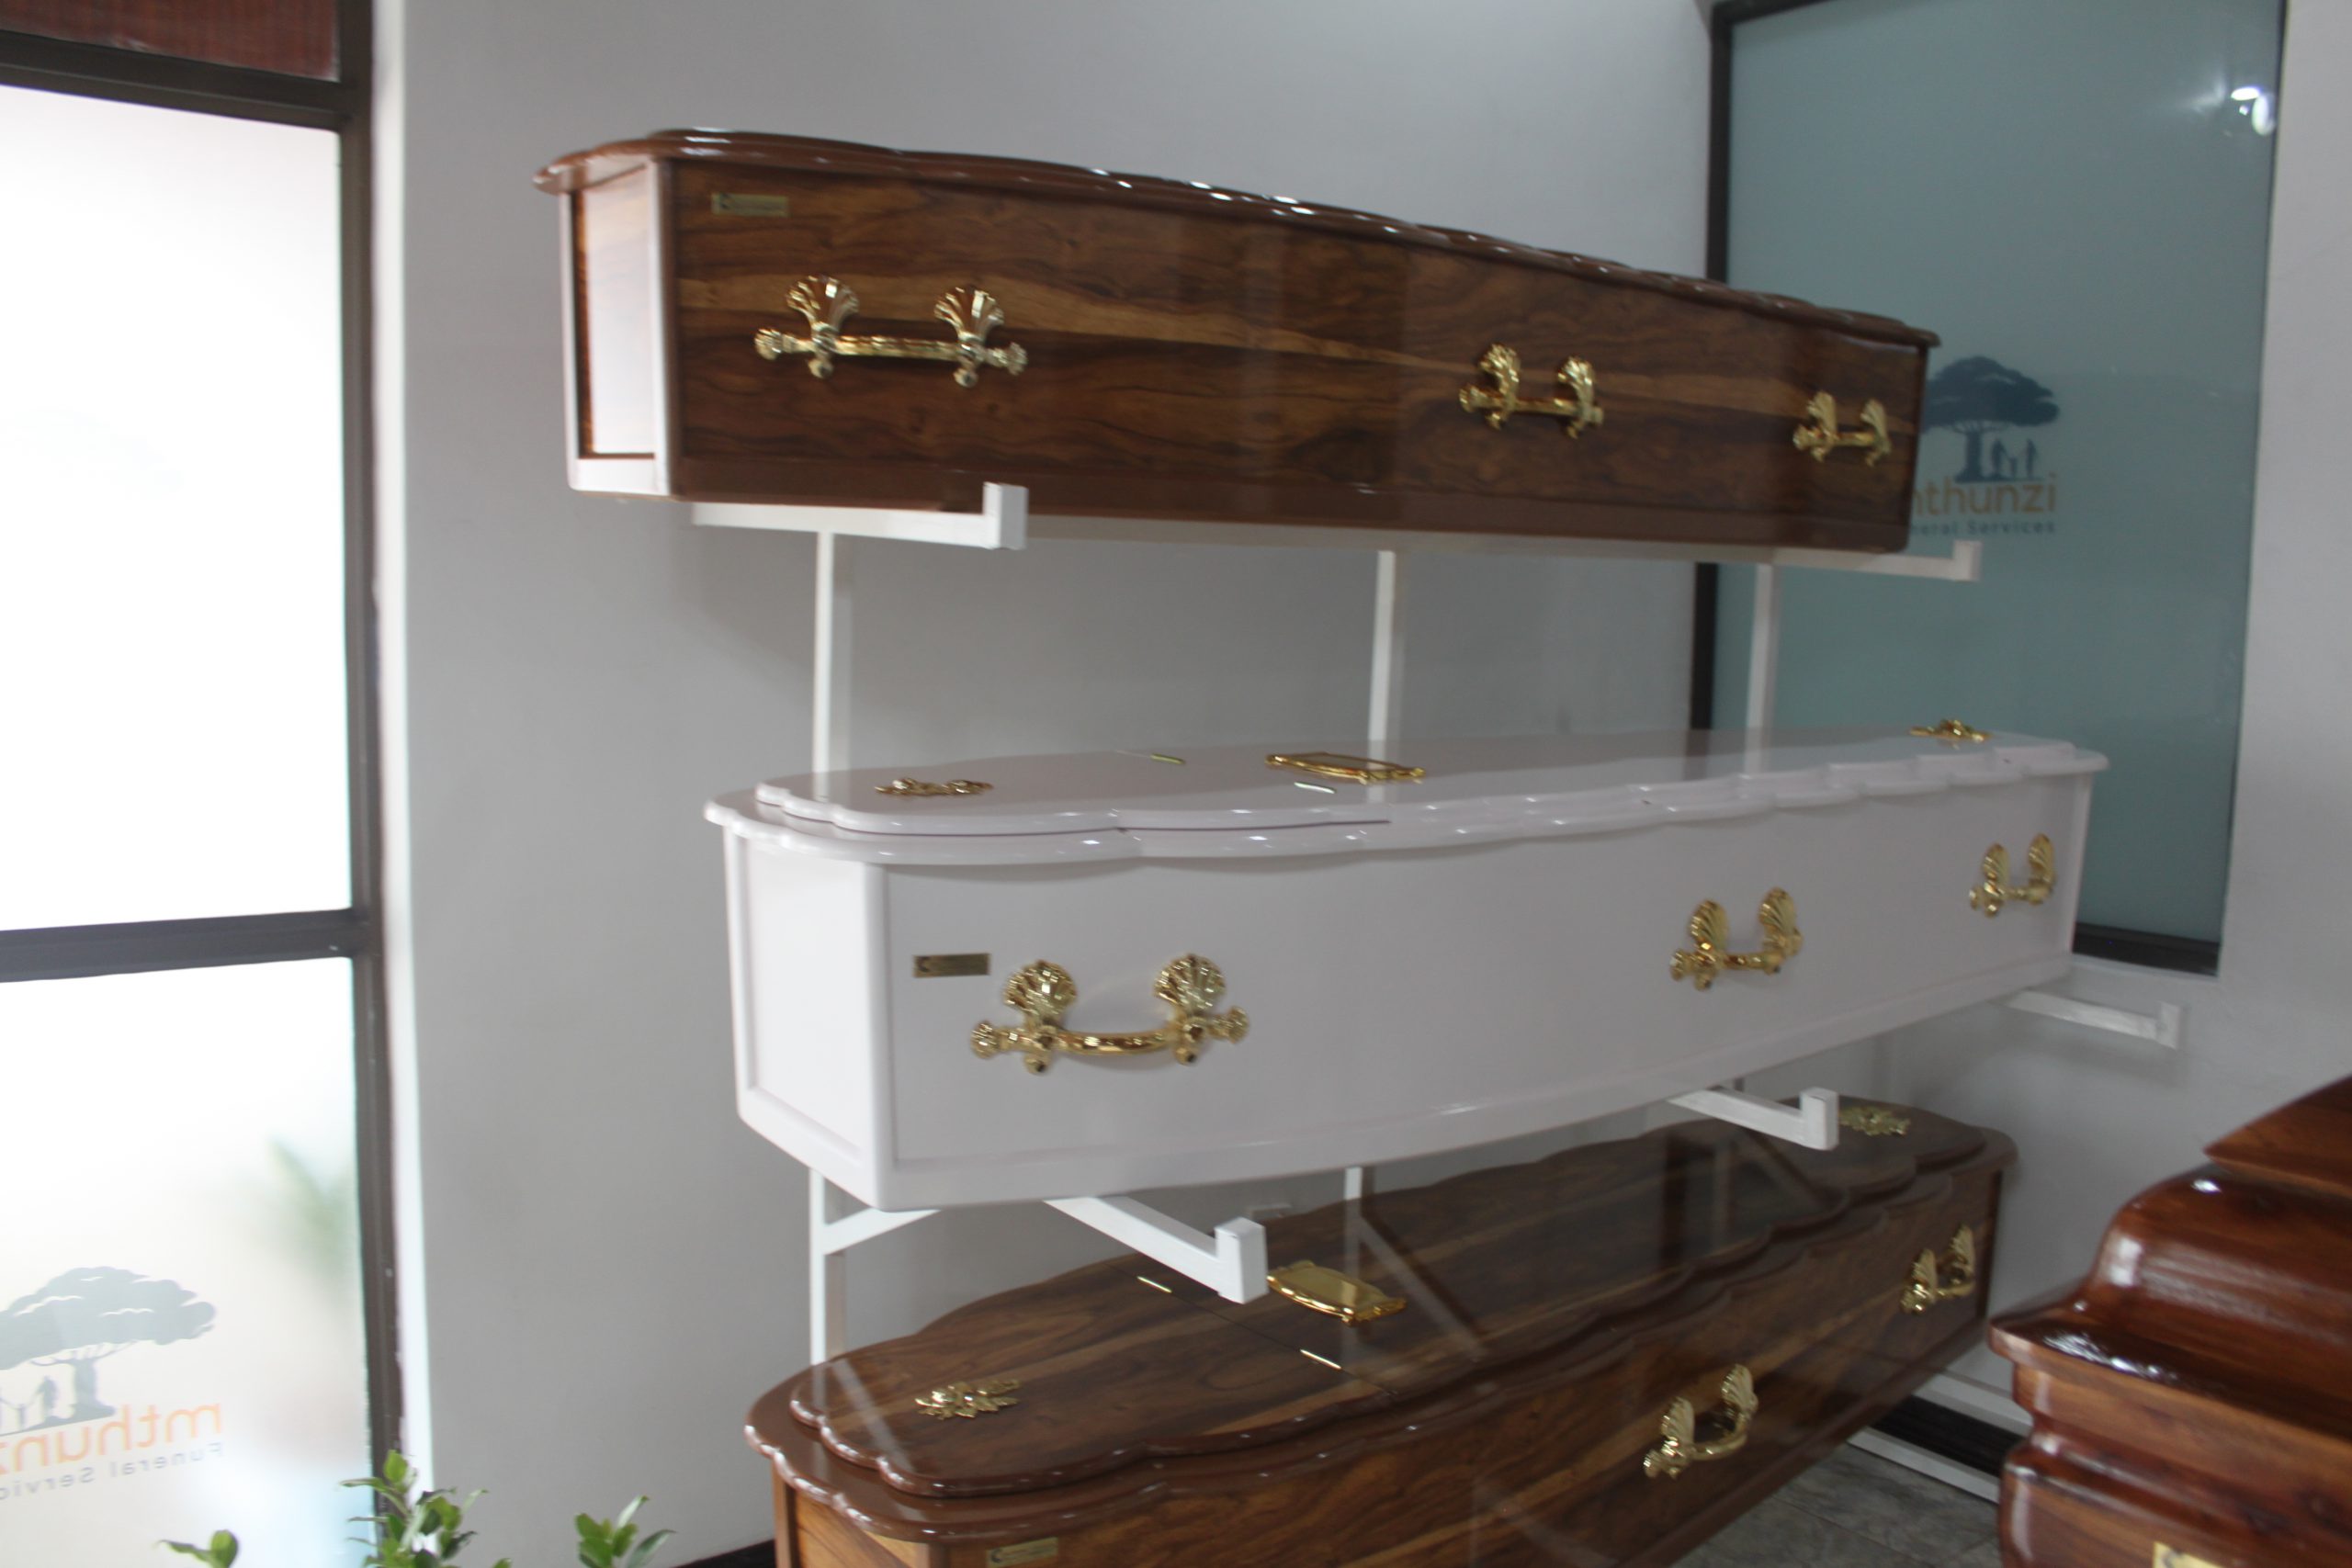 Coffins found at Mthunzi Funeral Service